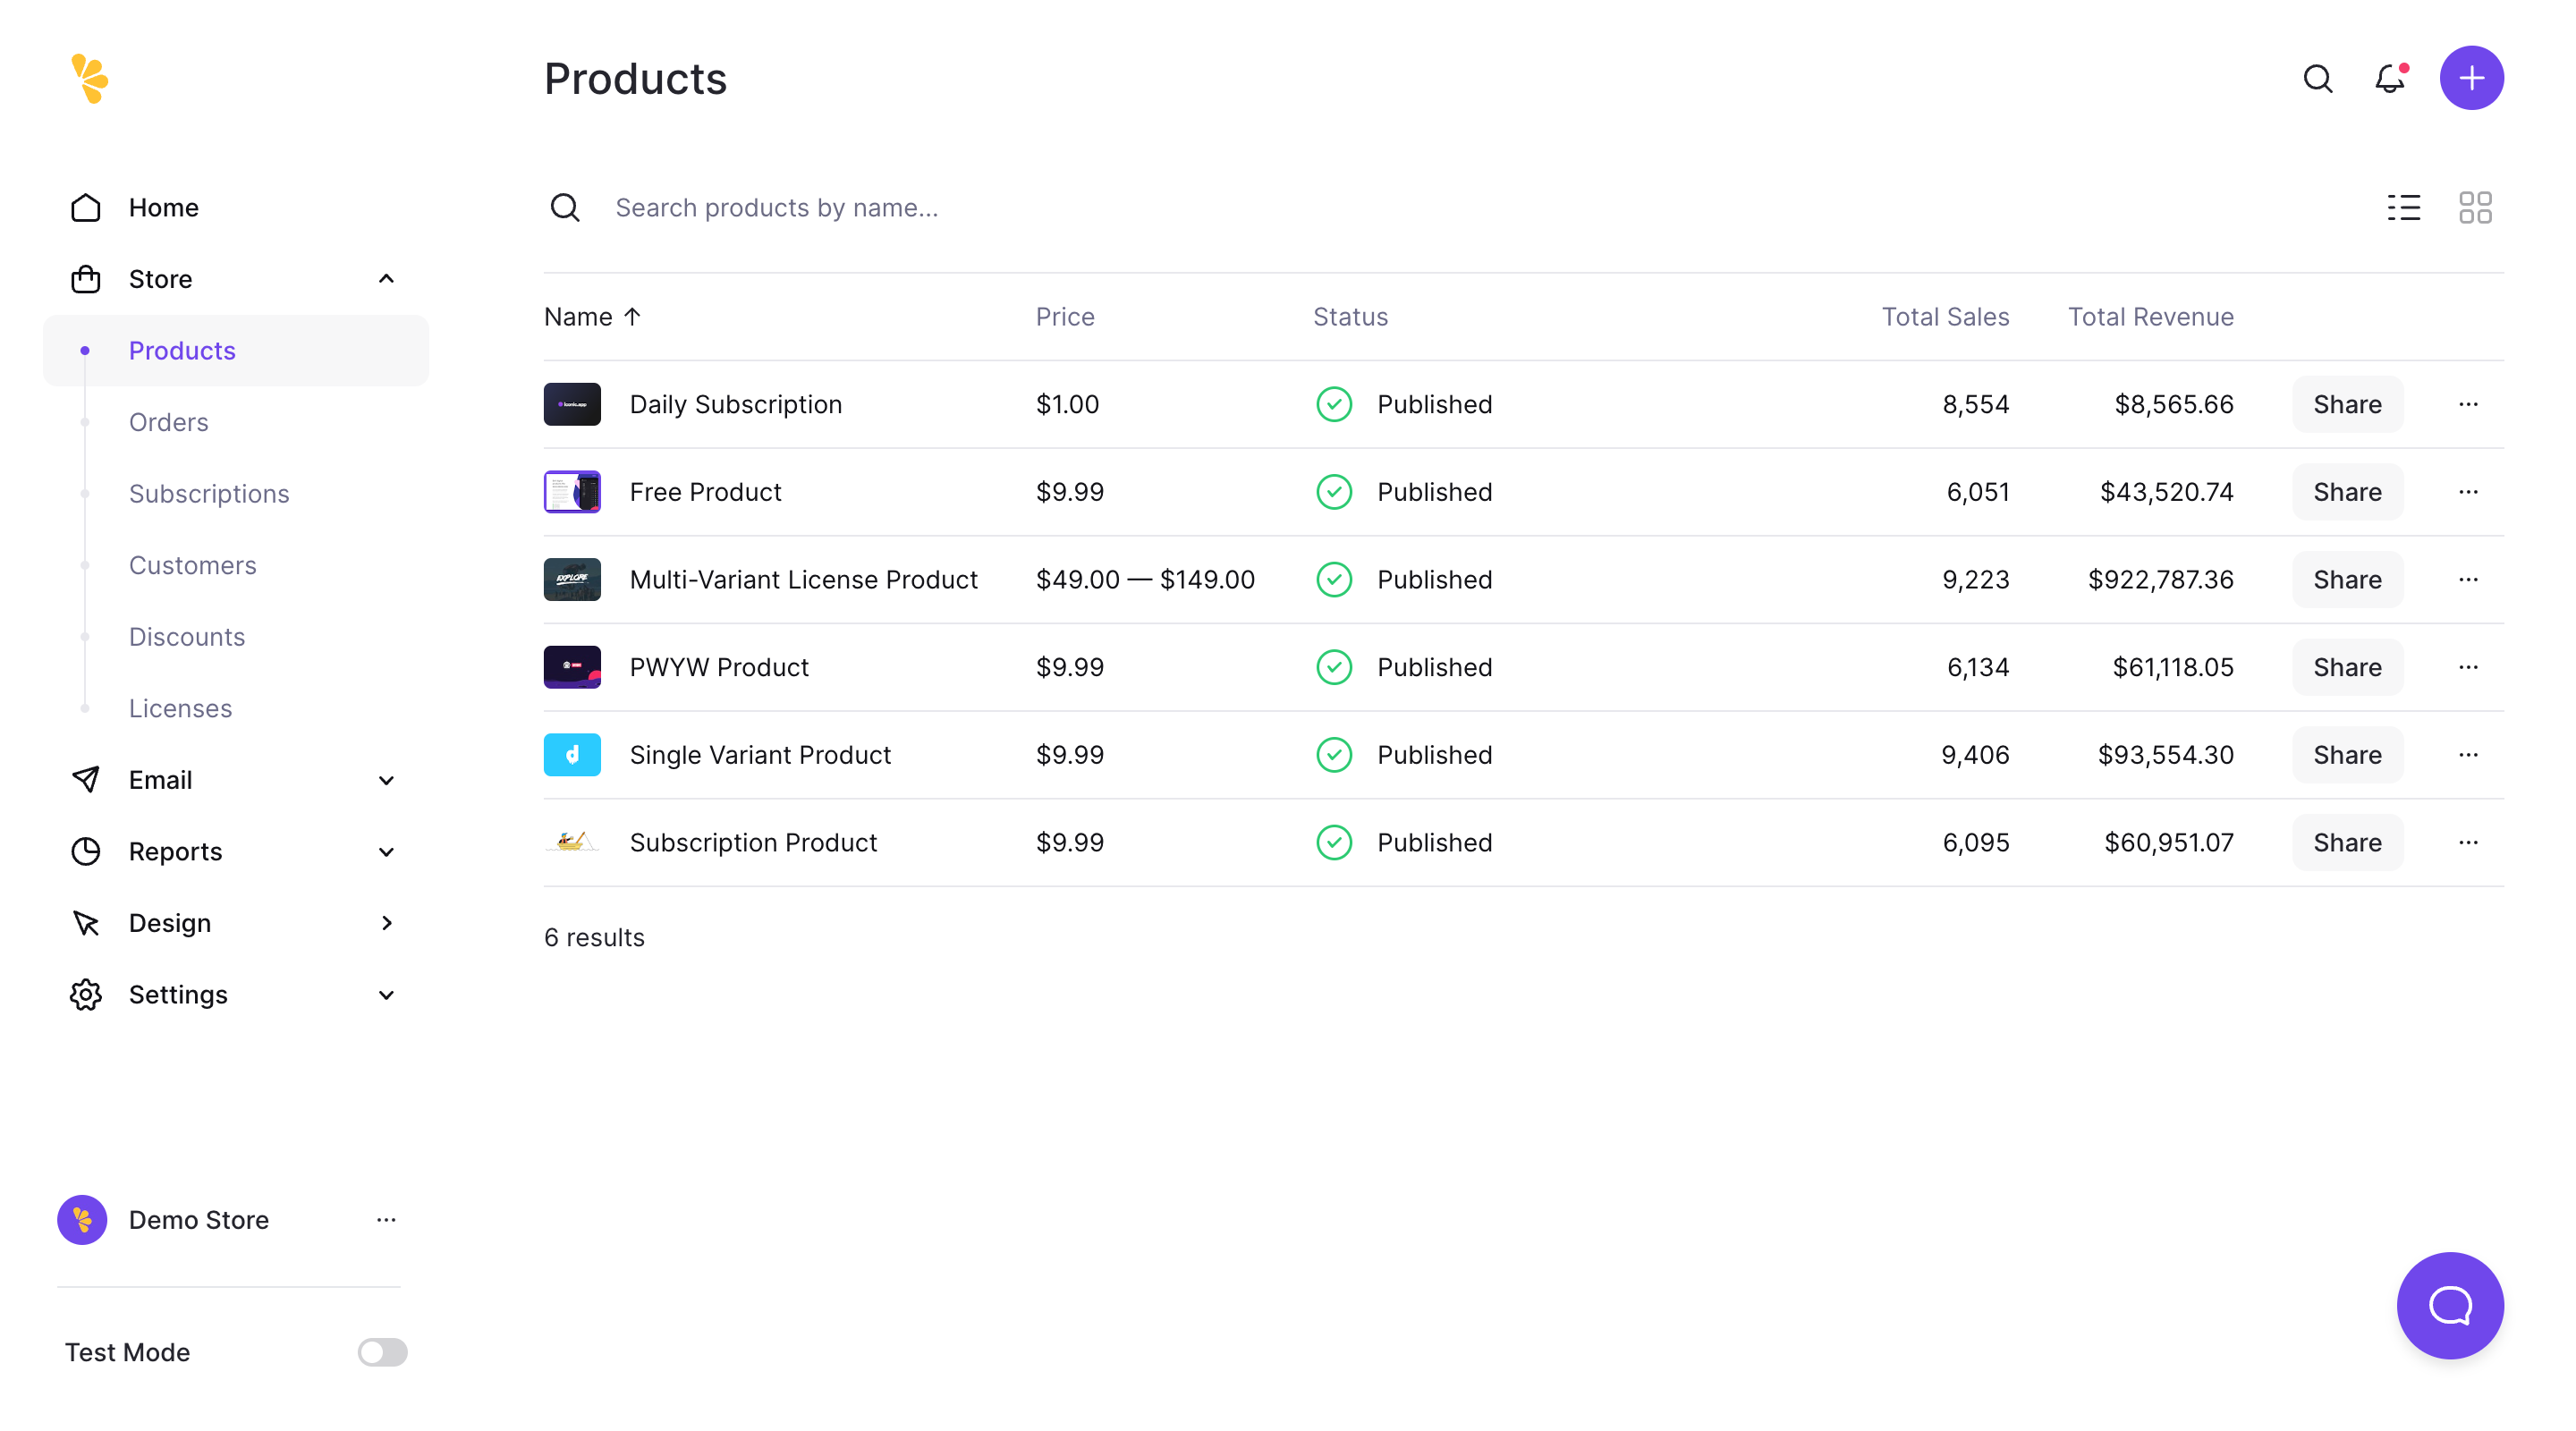 Screenshots of the Products page with a table view of products with basic information and revenue metrics. Above the table is a search field to filter the products. To the left is a sidebar menu with the Store section expanded and Products being the active page.